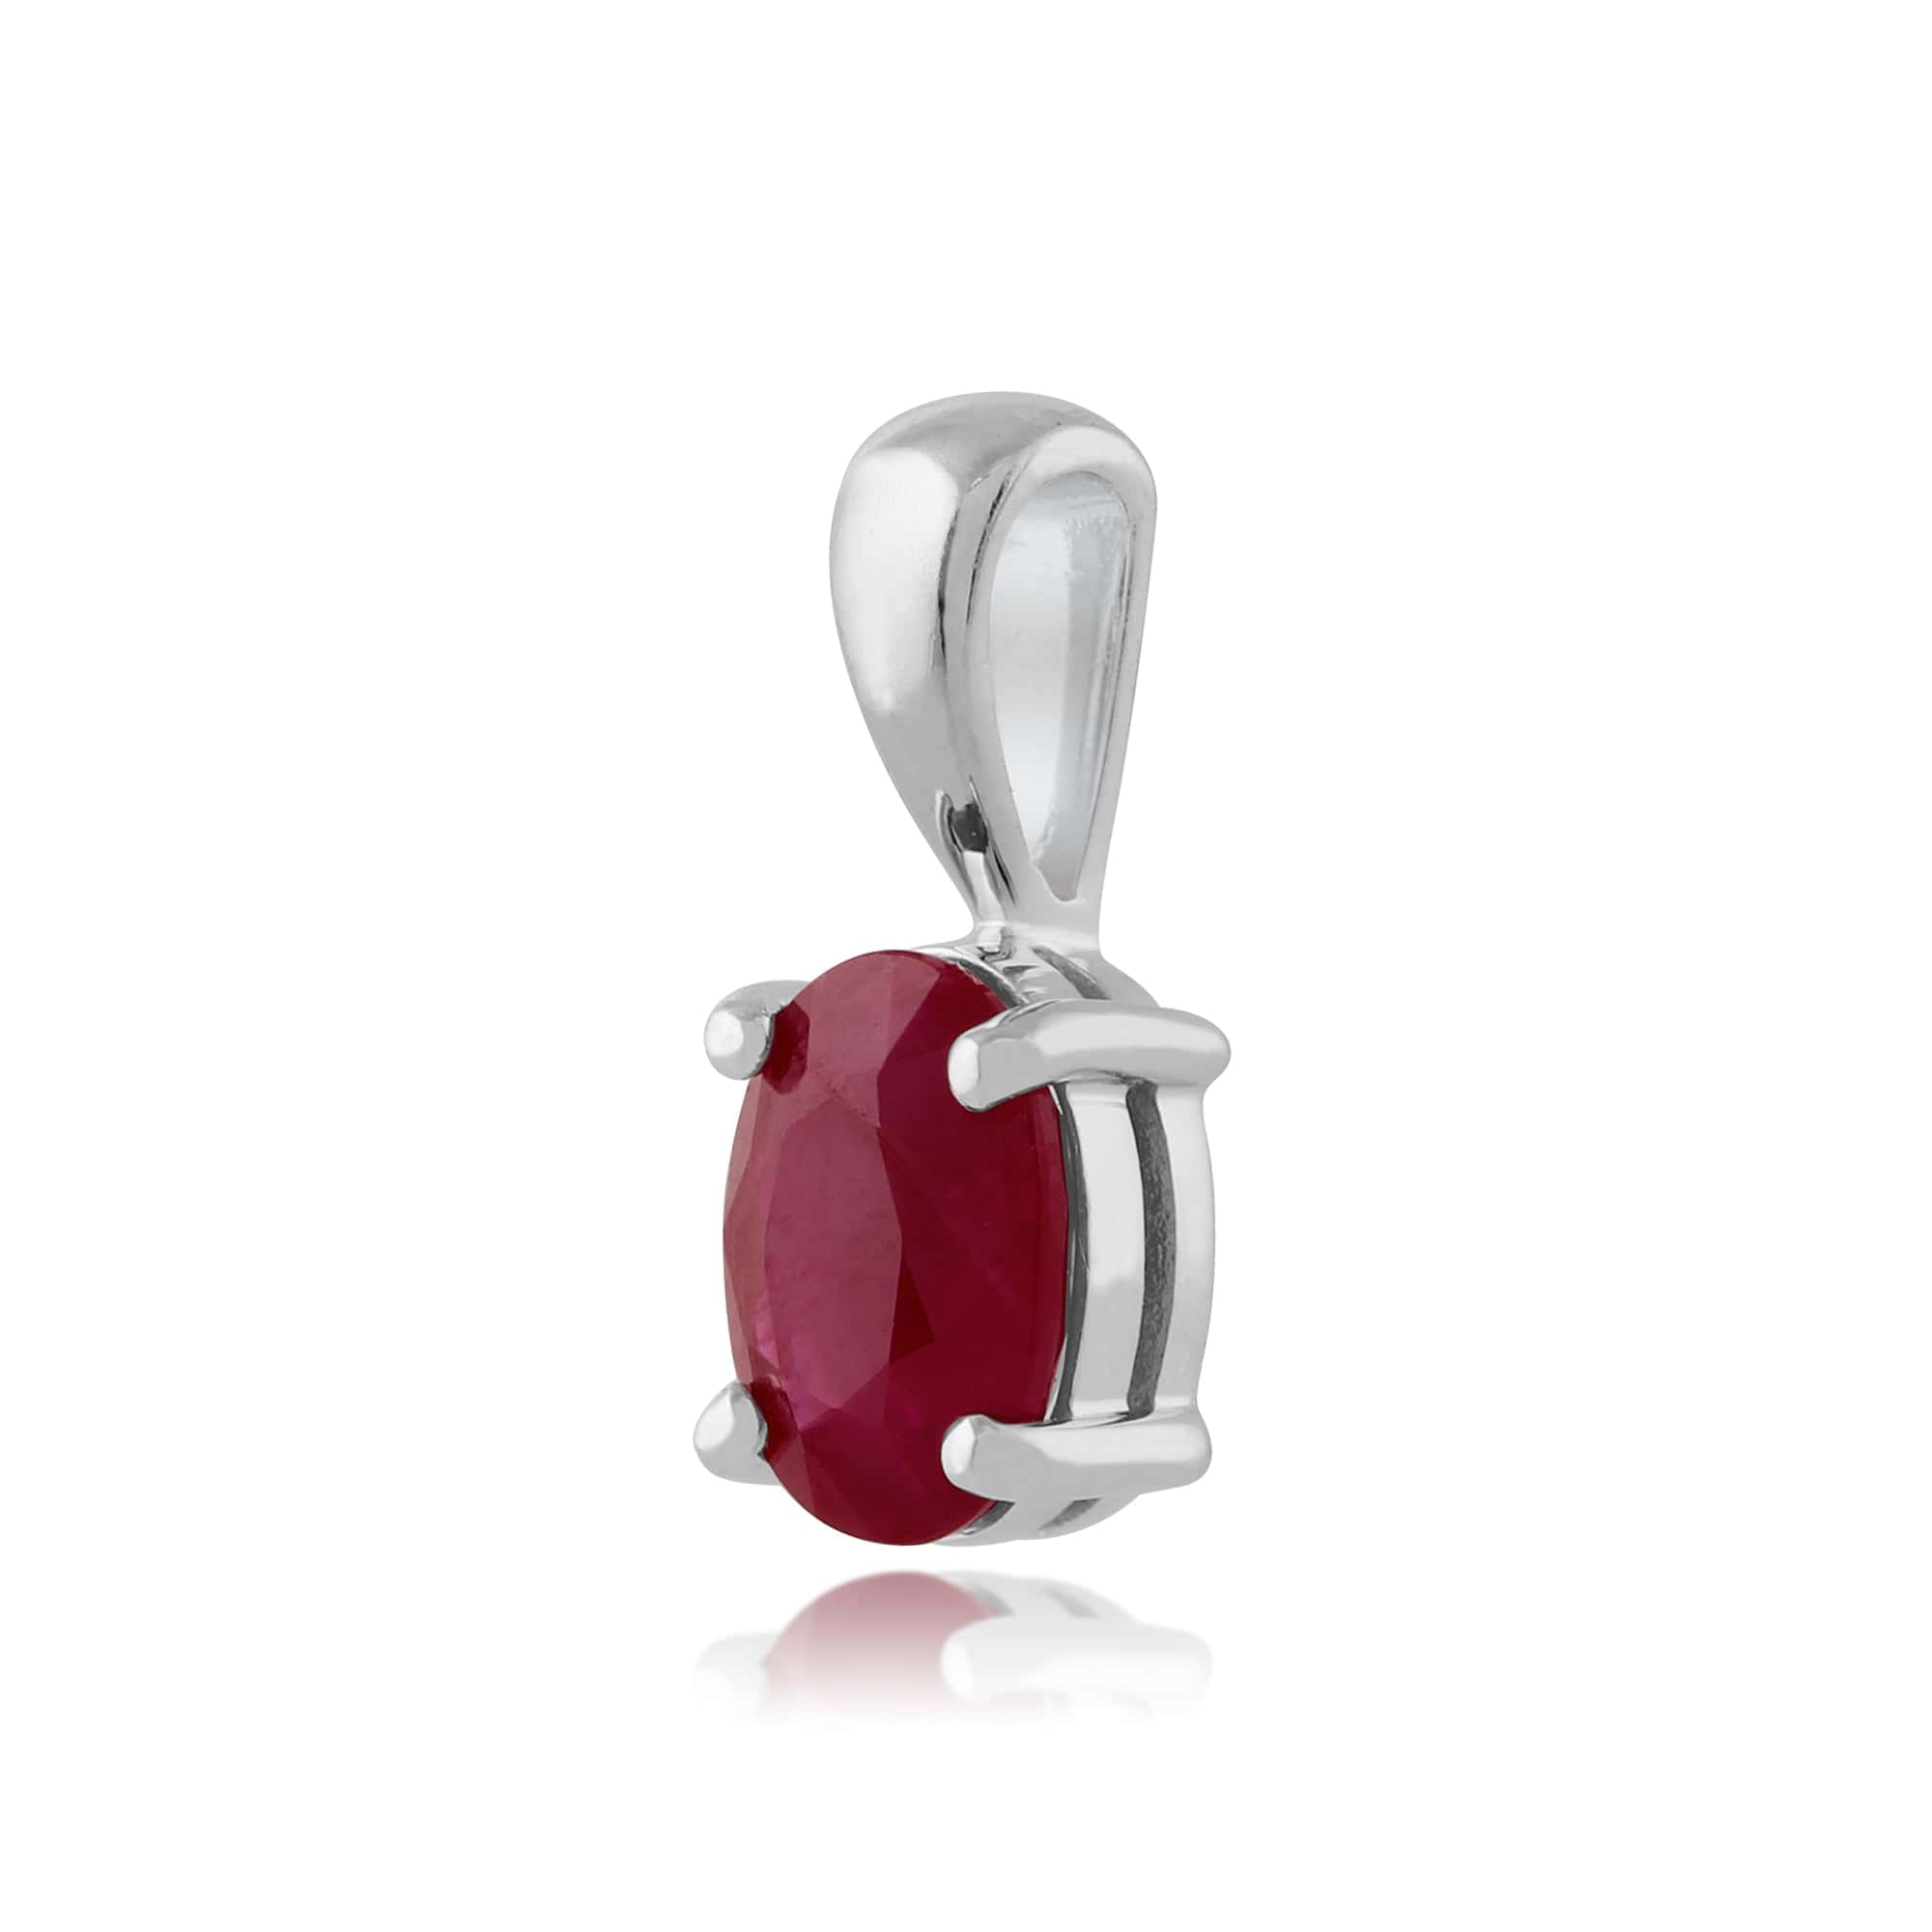 117E0017069-117P0013079 Classic Oval Ruby Single Stone Stud Earrings & Pendant Set in 9ct White Gold 5